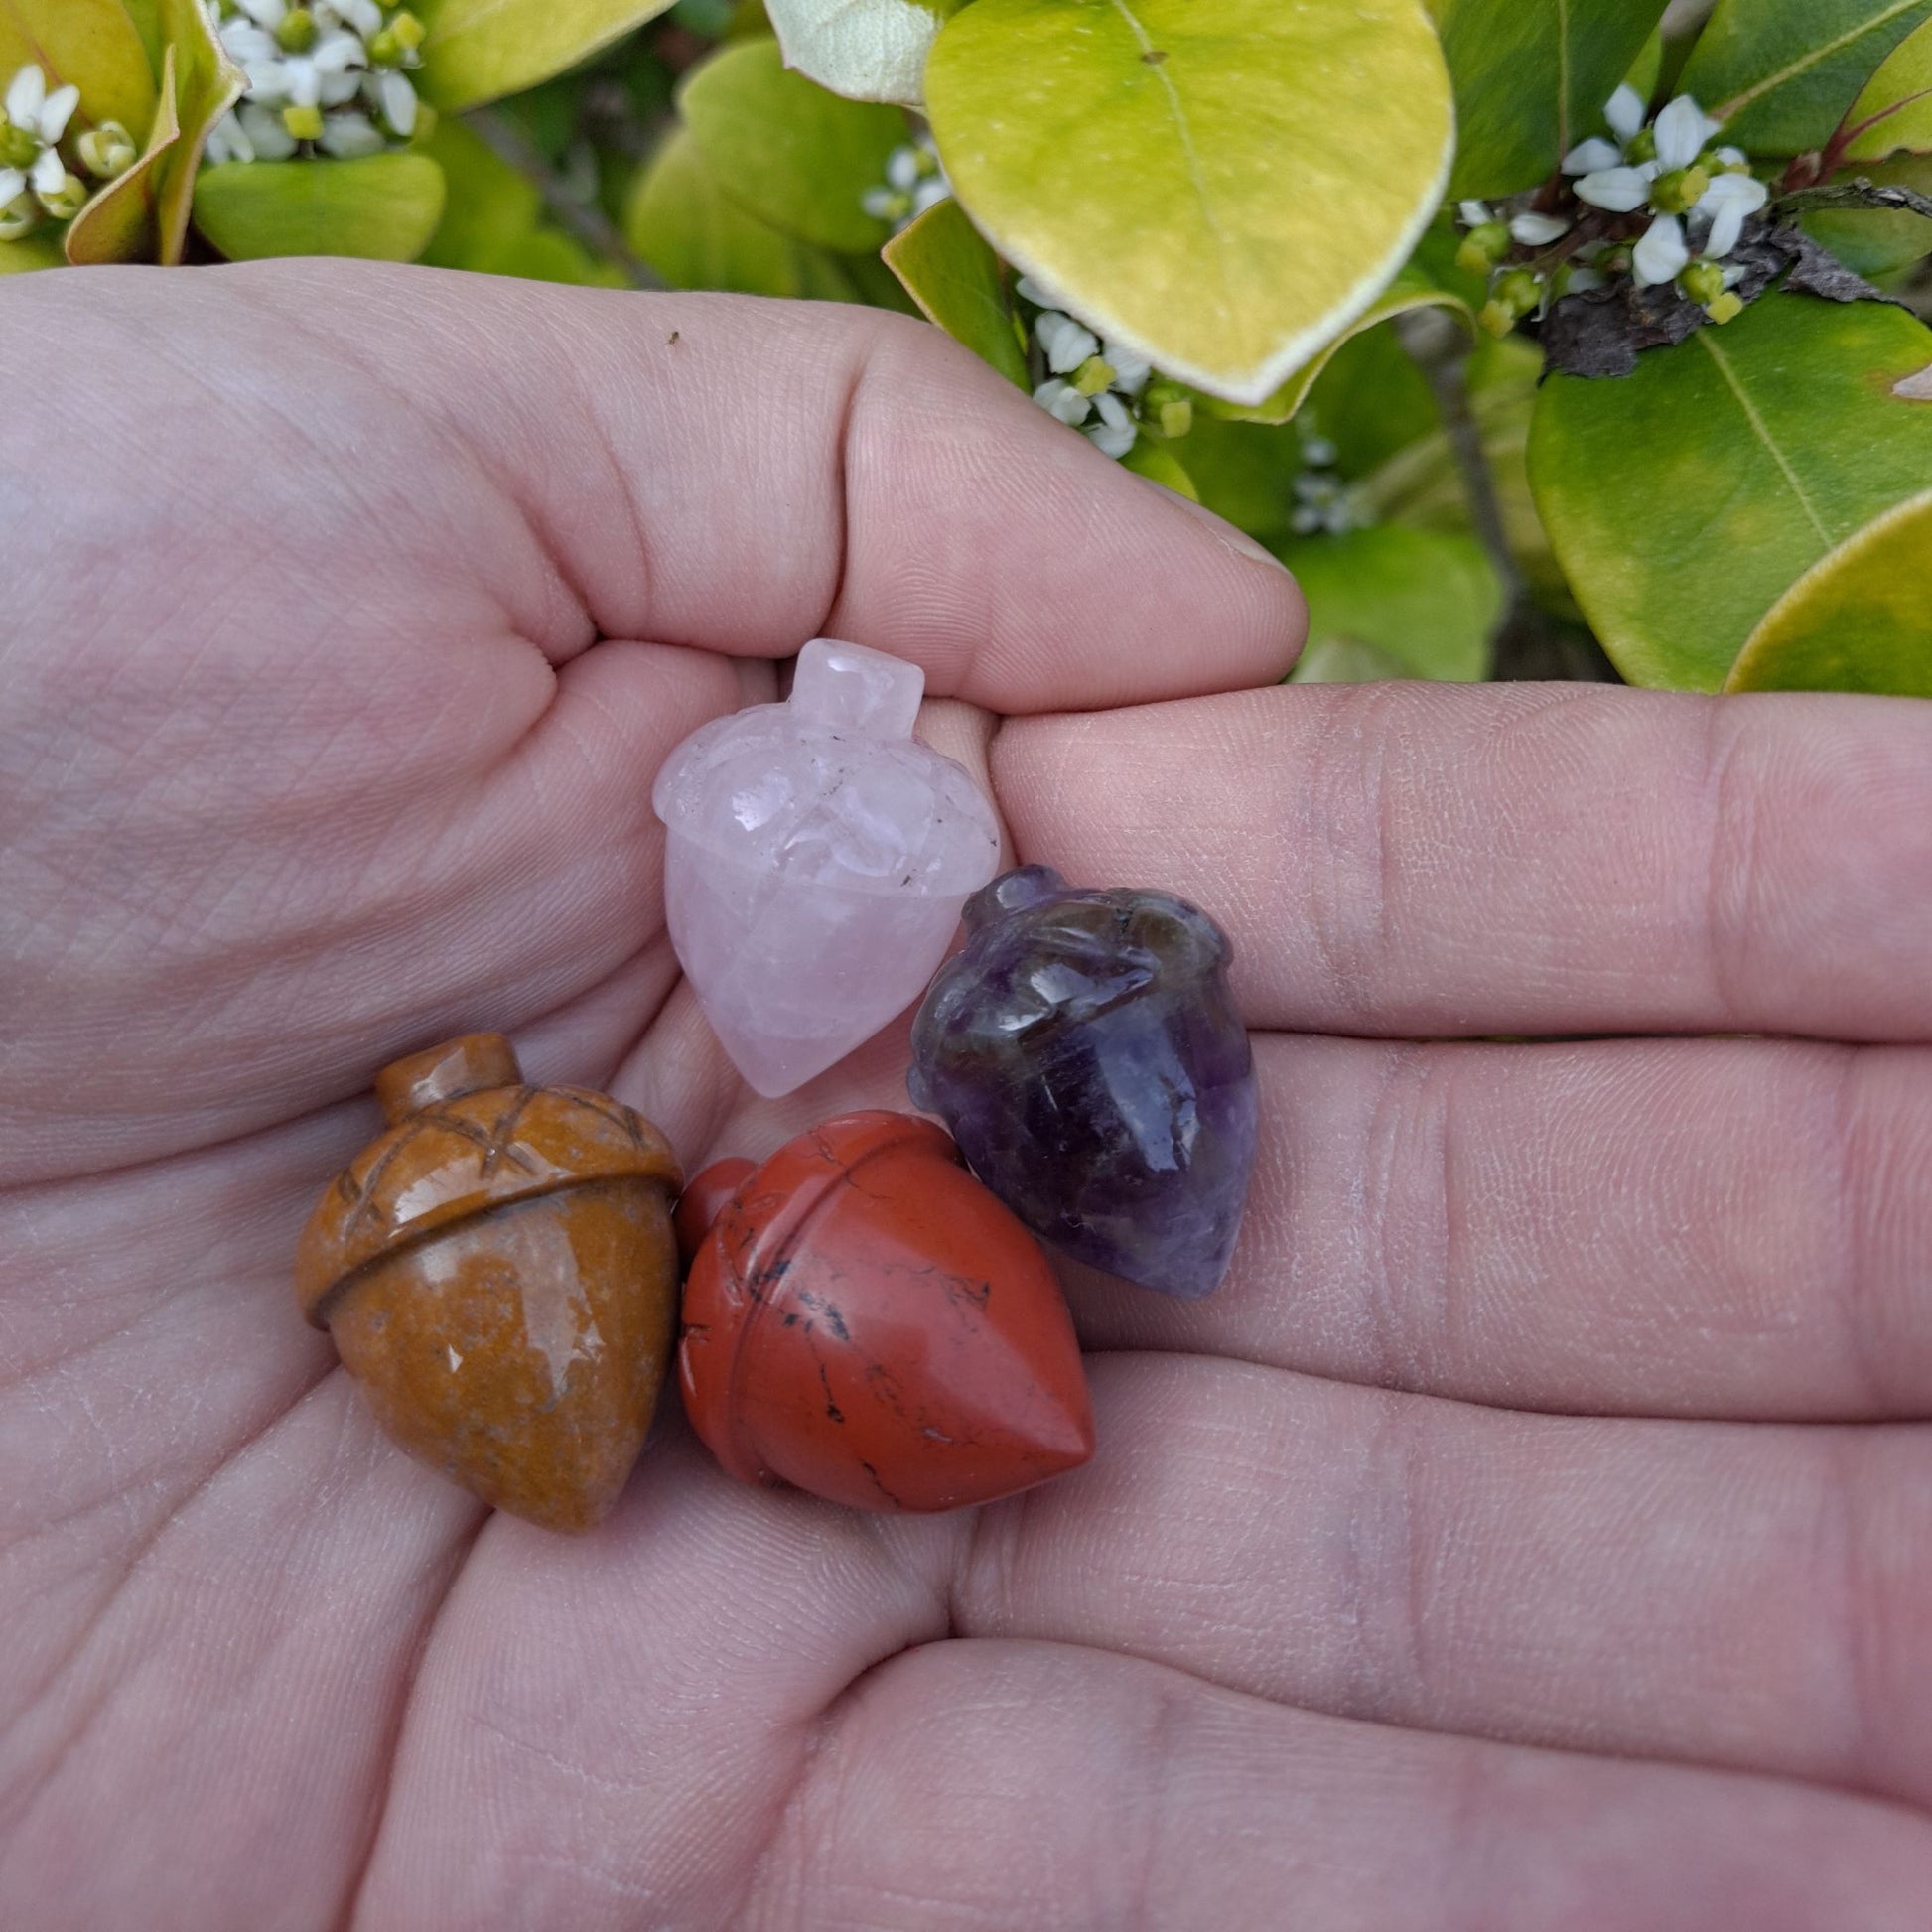 Inner Harmony On-The-Go: Dumi's Crystals Chevron Amethyst Acorn Carving (26x20mm) fosters clarity, intuition & emotional well-being. Pocket-sized potential. 